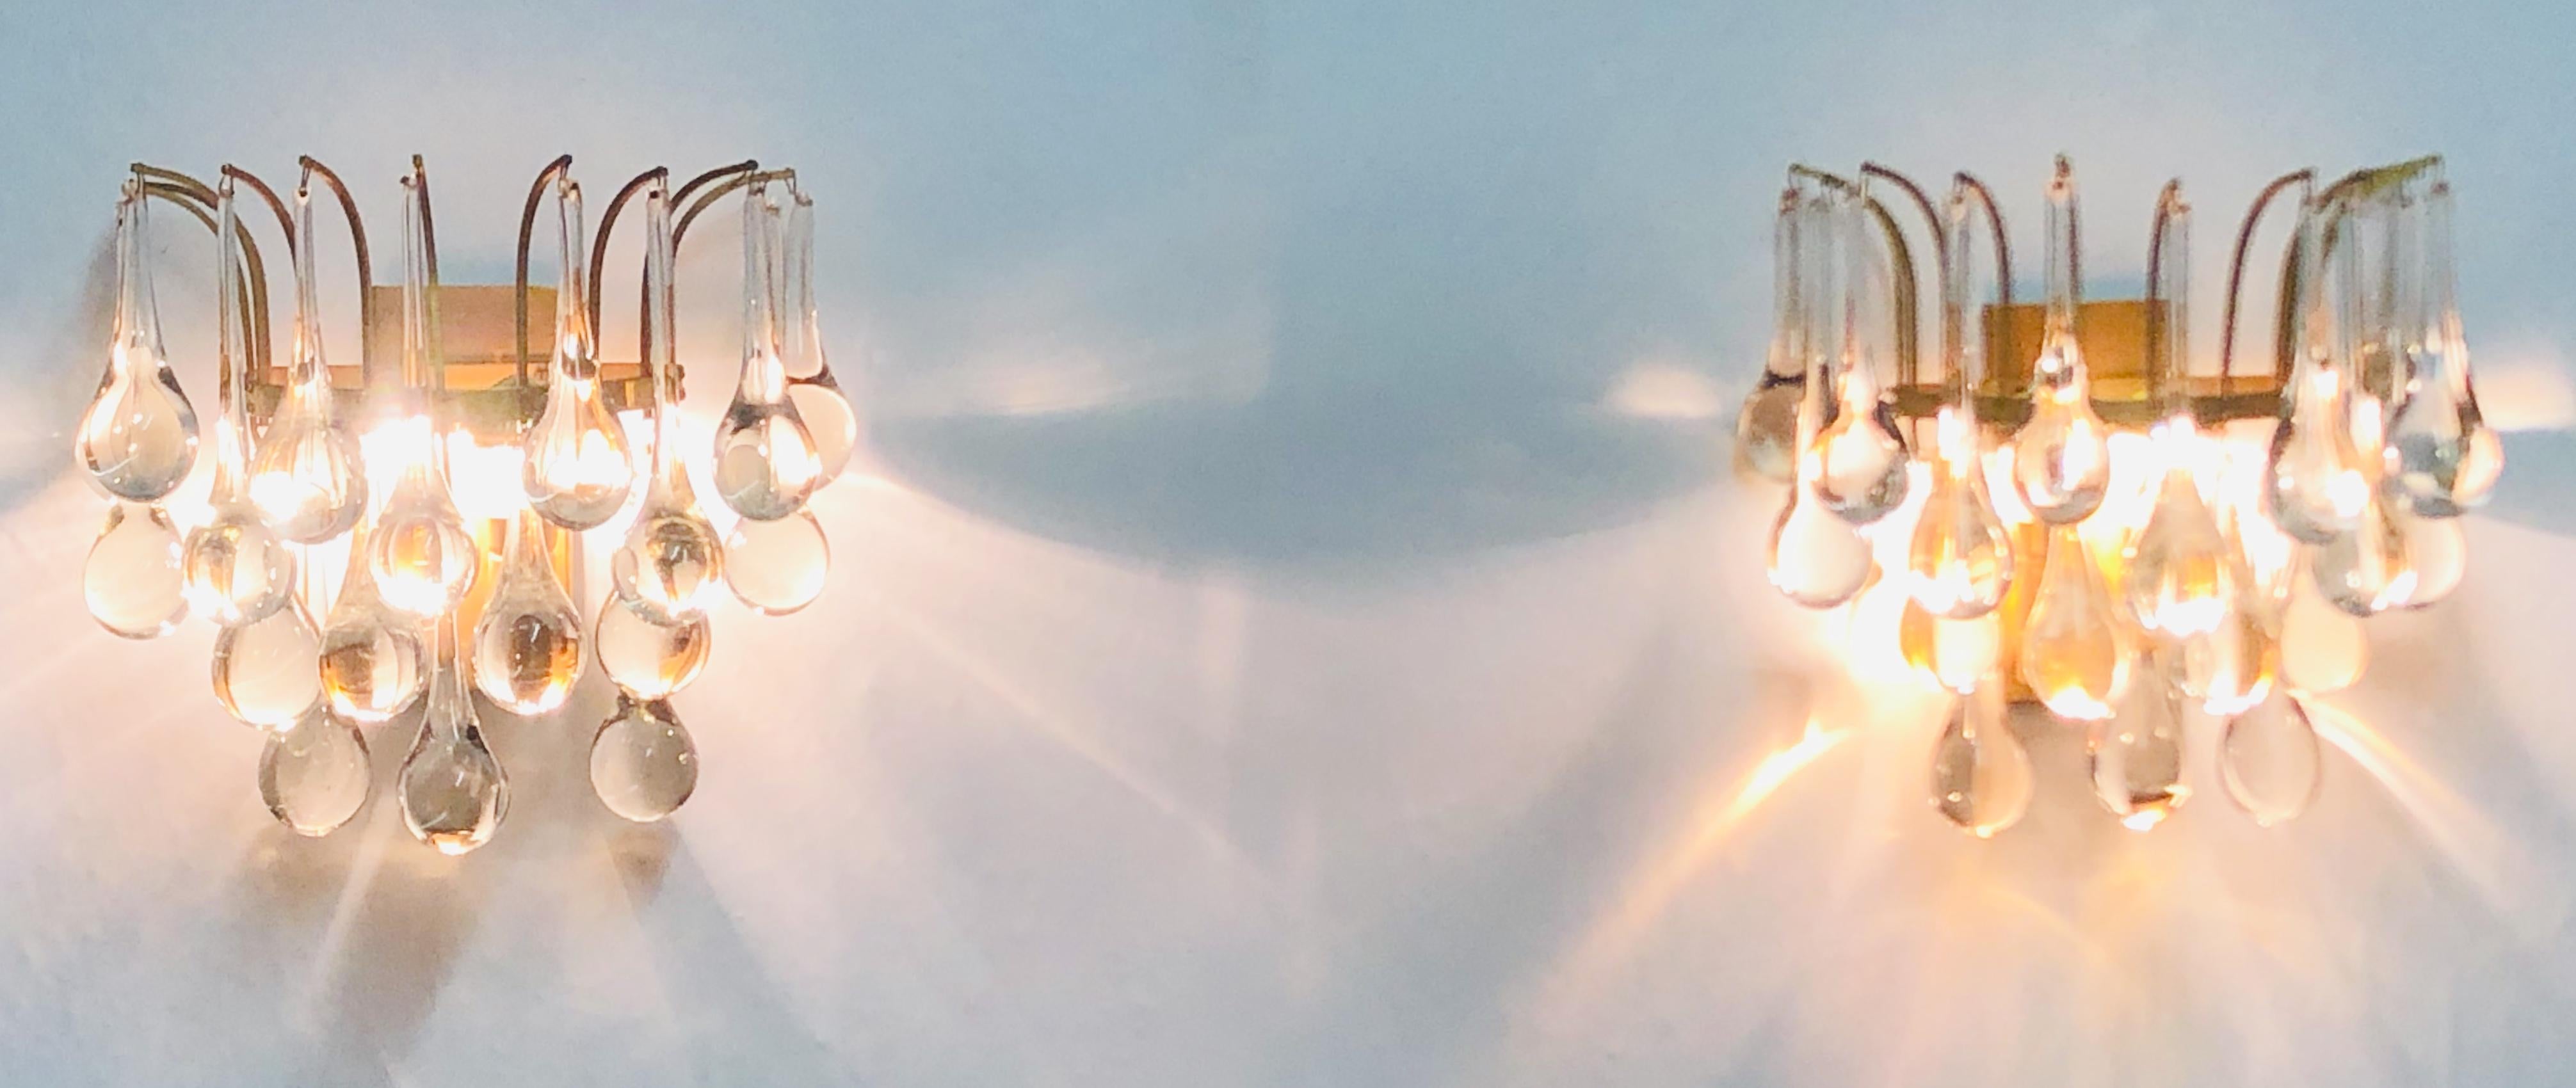 Pair of Midcentury Murano Glass Wall Sconces by E.Palme, circa 1960s 2